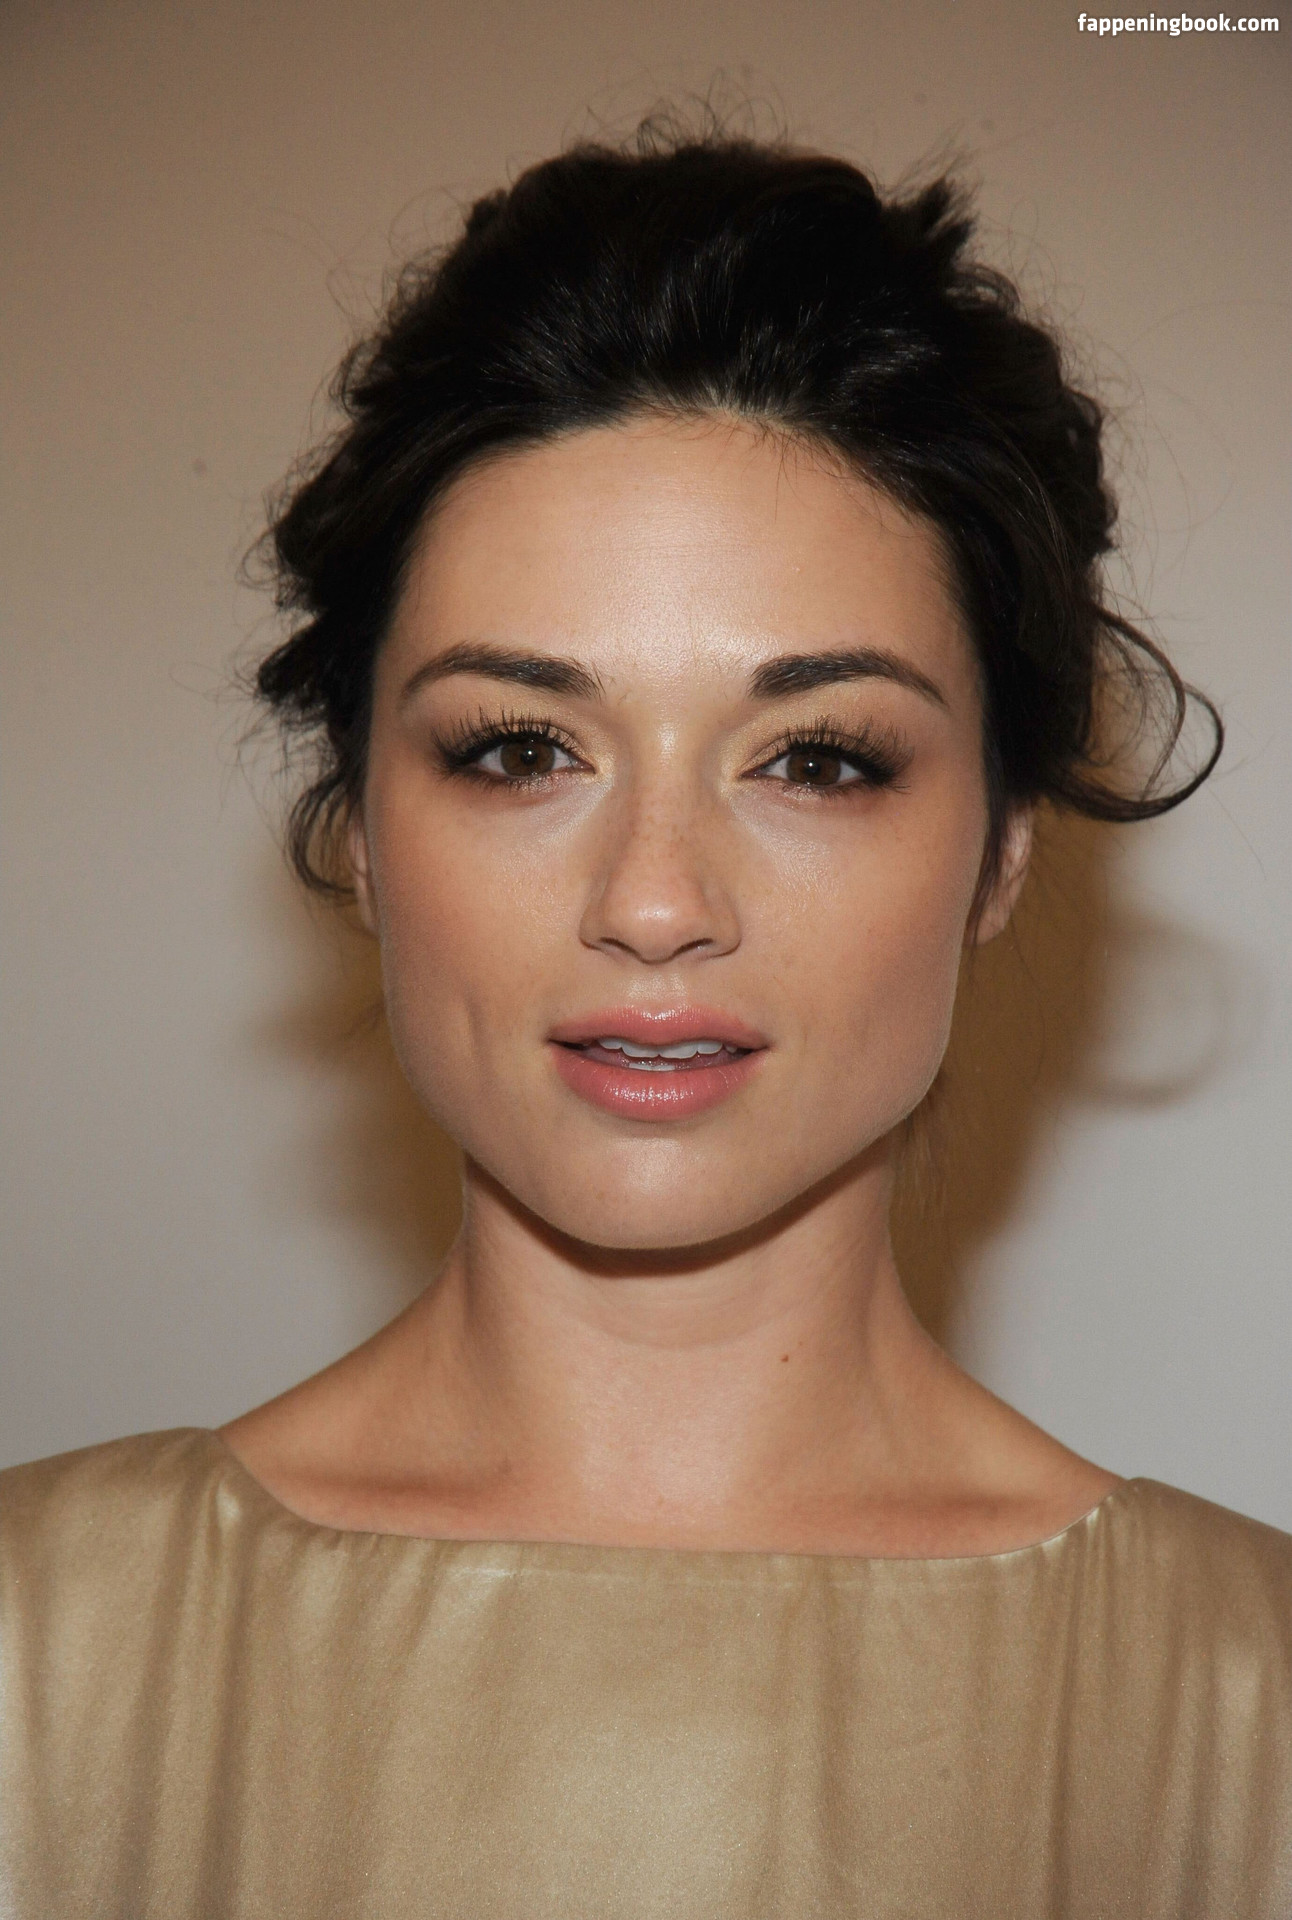 Crystal Reed Nude Yes Porn Pic